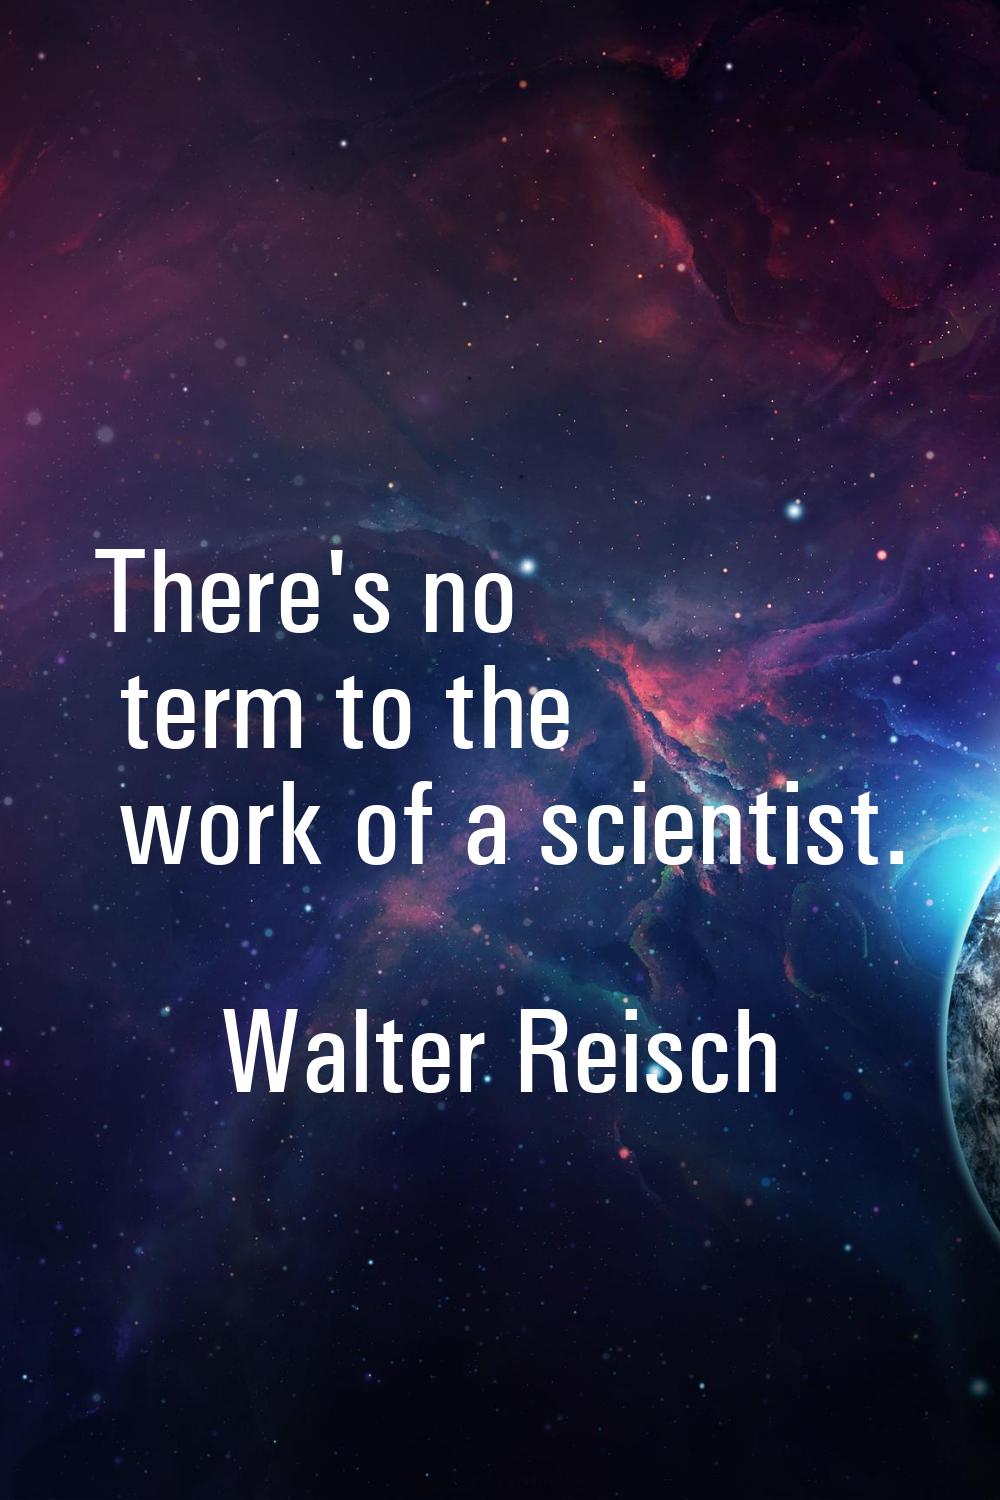 There's no term to the work of a scientist.